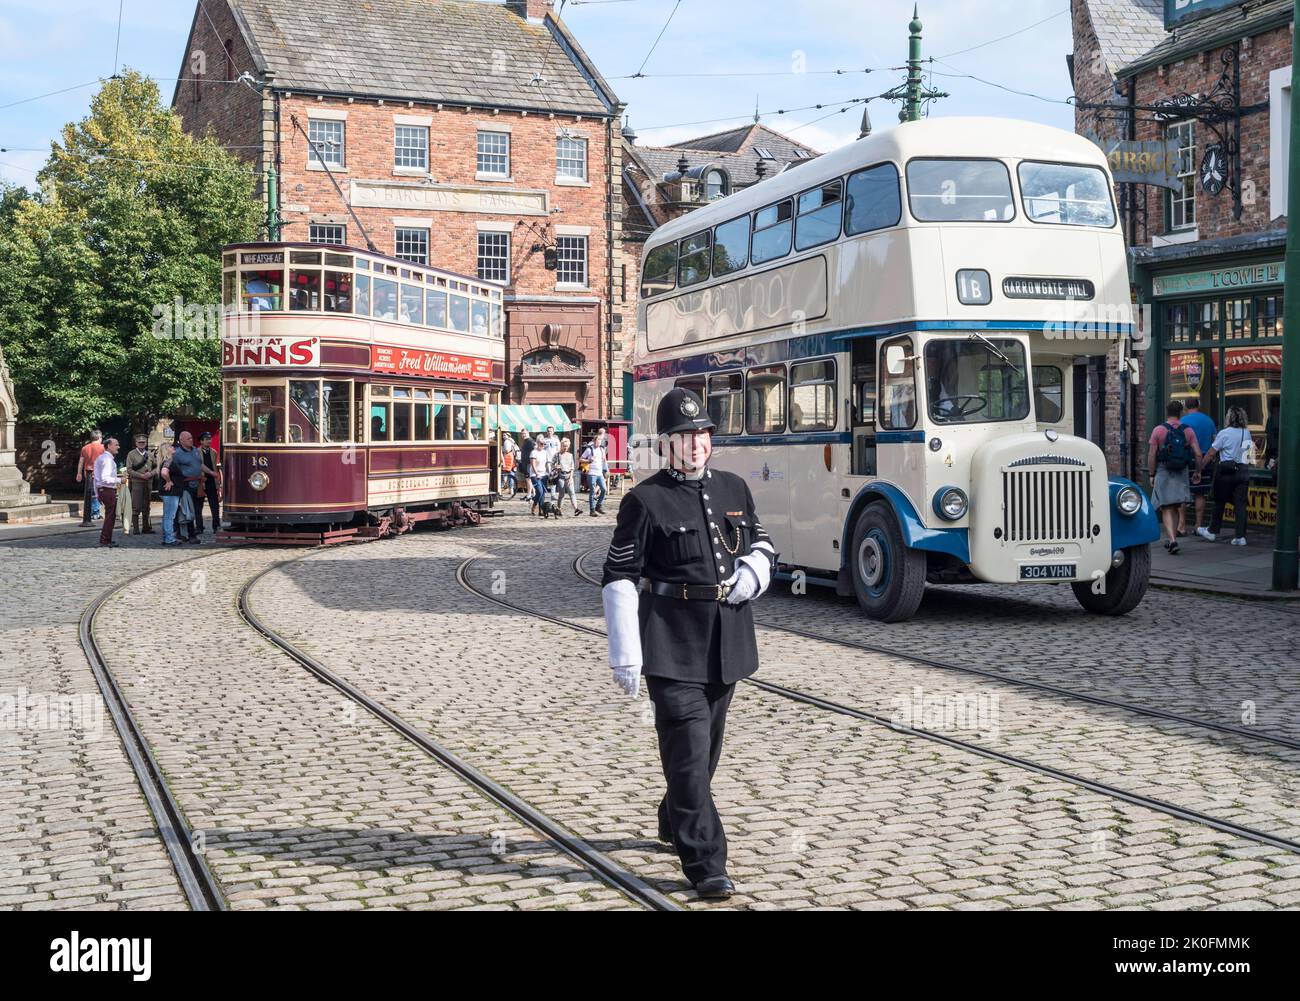 A 'Police Officer' directs traffic in the town at Beamish Museum, England, UK Stock Photo